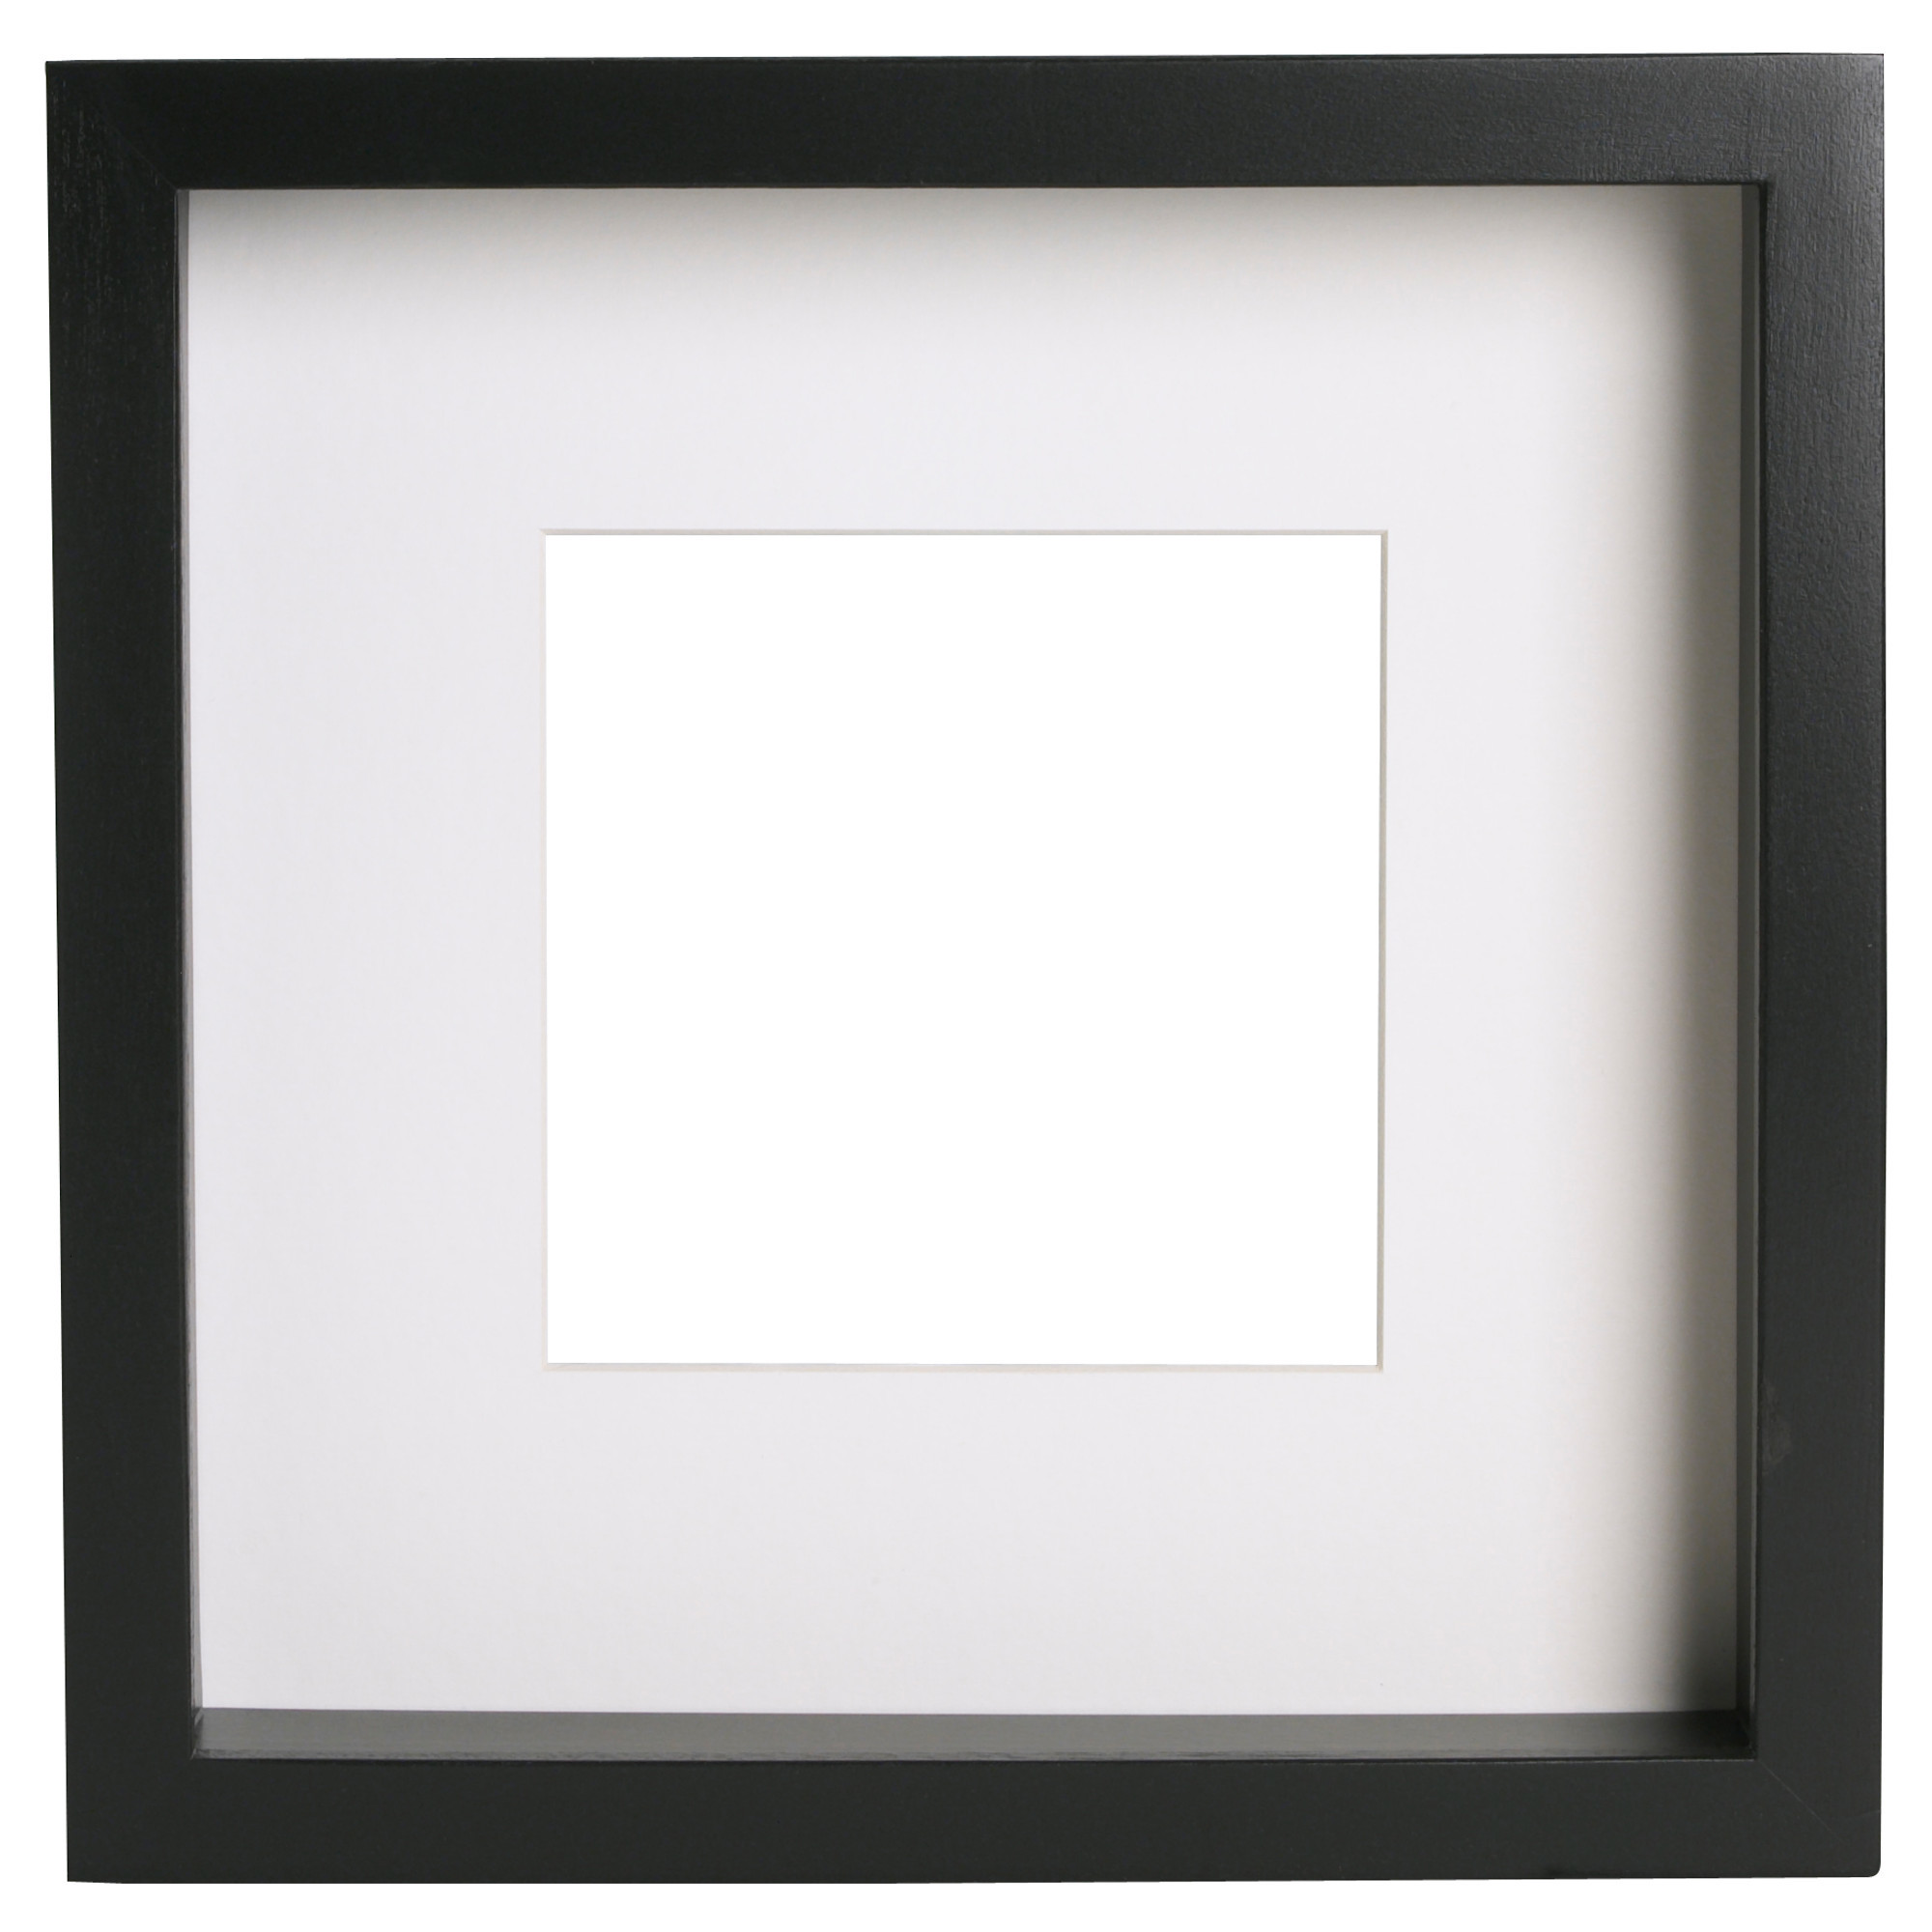 2000x2000 Best Frame For Black And White Photo Ribba Frame 9x9 Ikea Small Home  Remodel Ideas